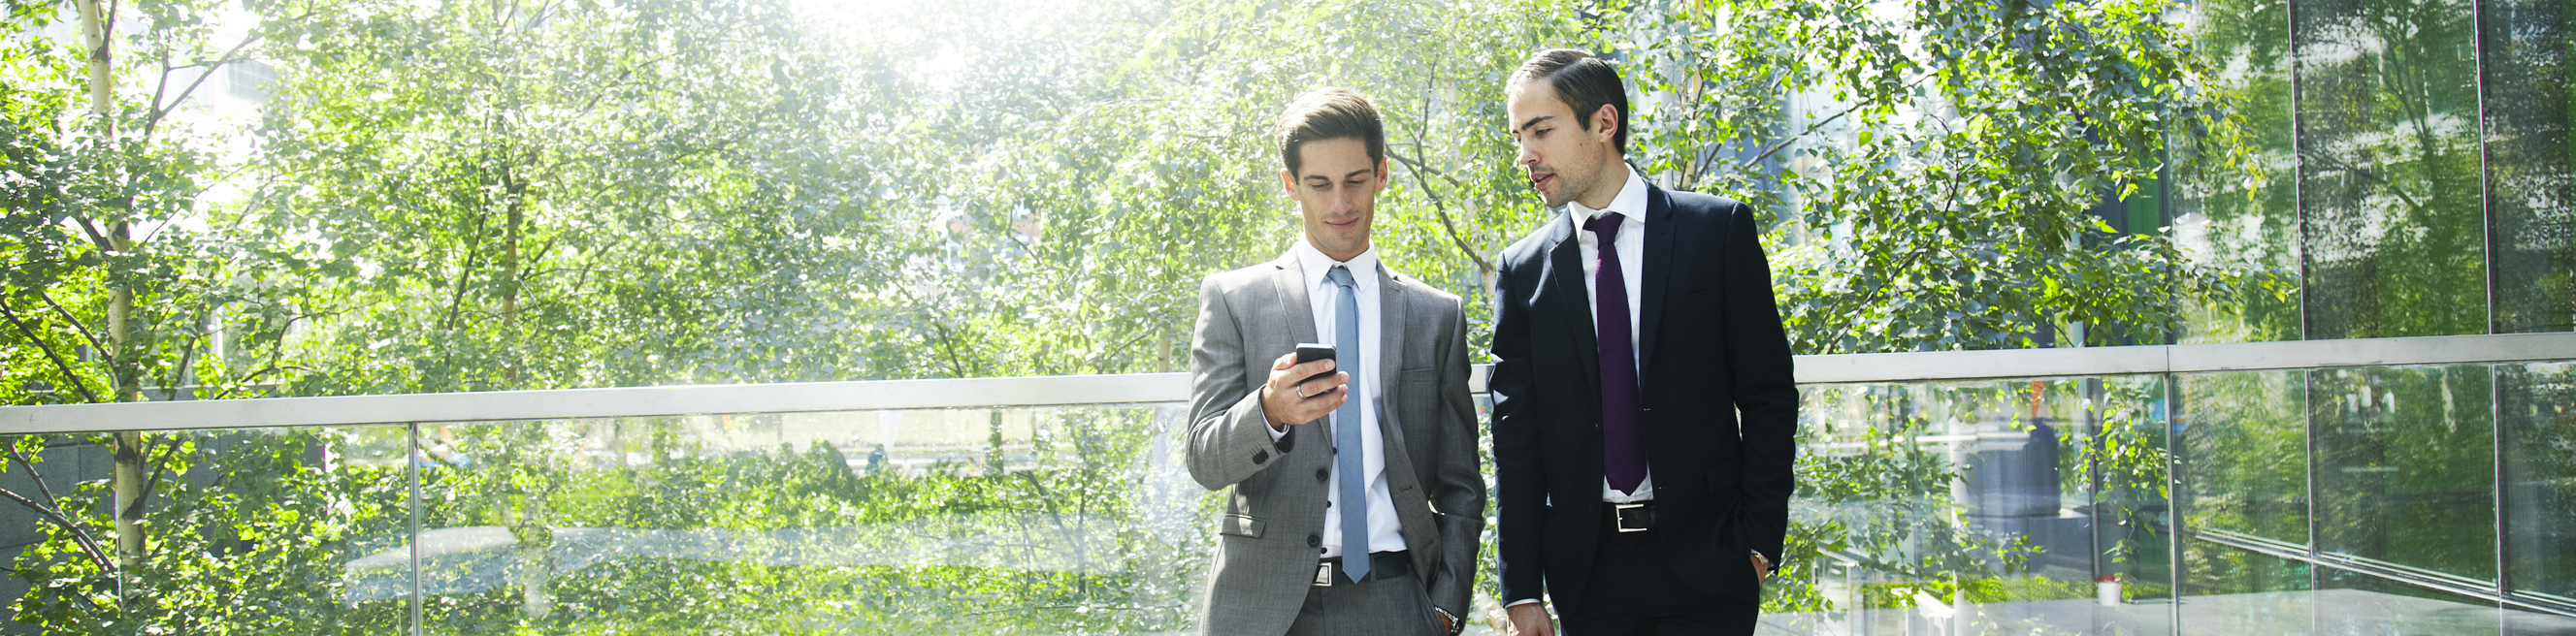 Two businessmen chatting surrounded by trees.